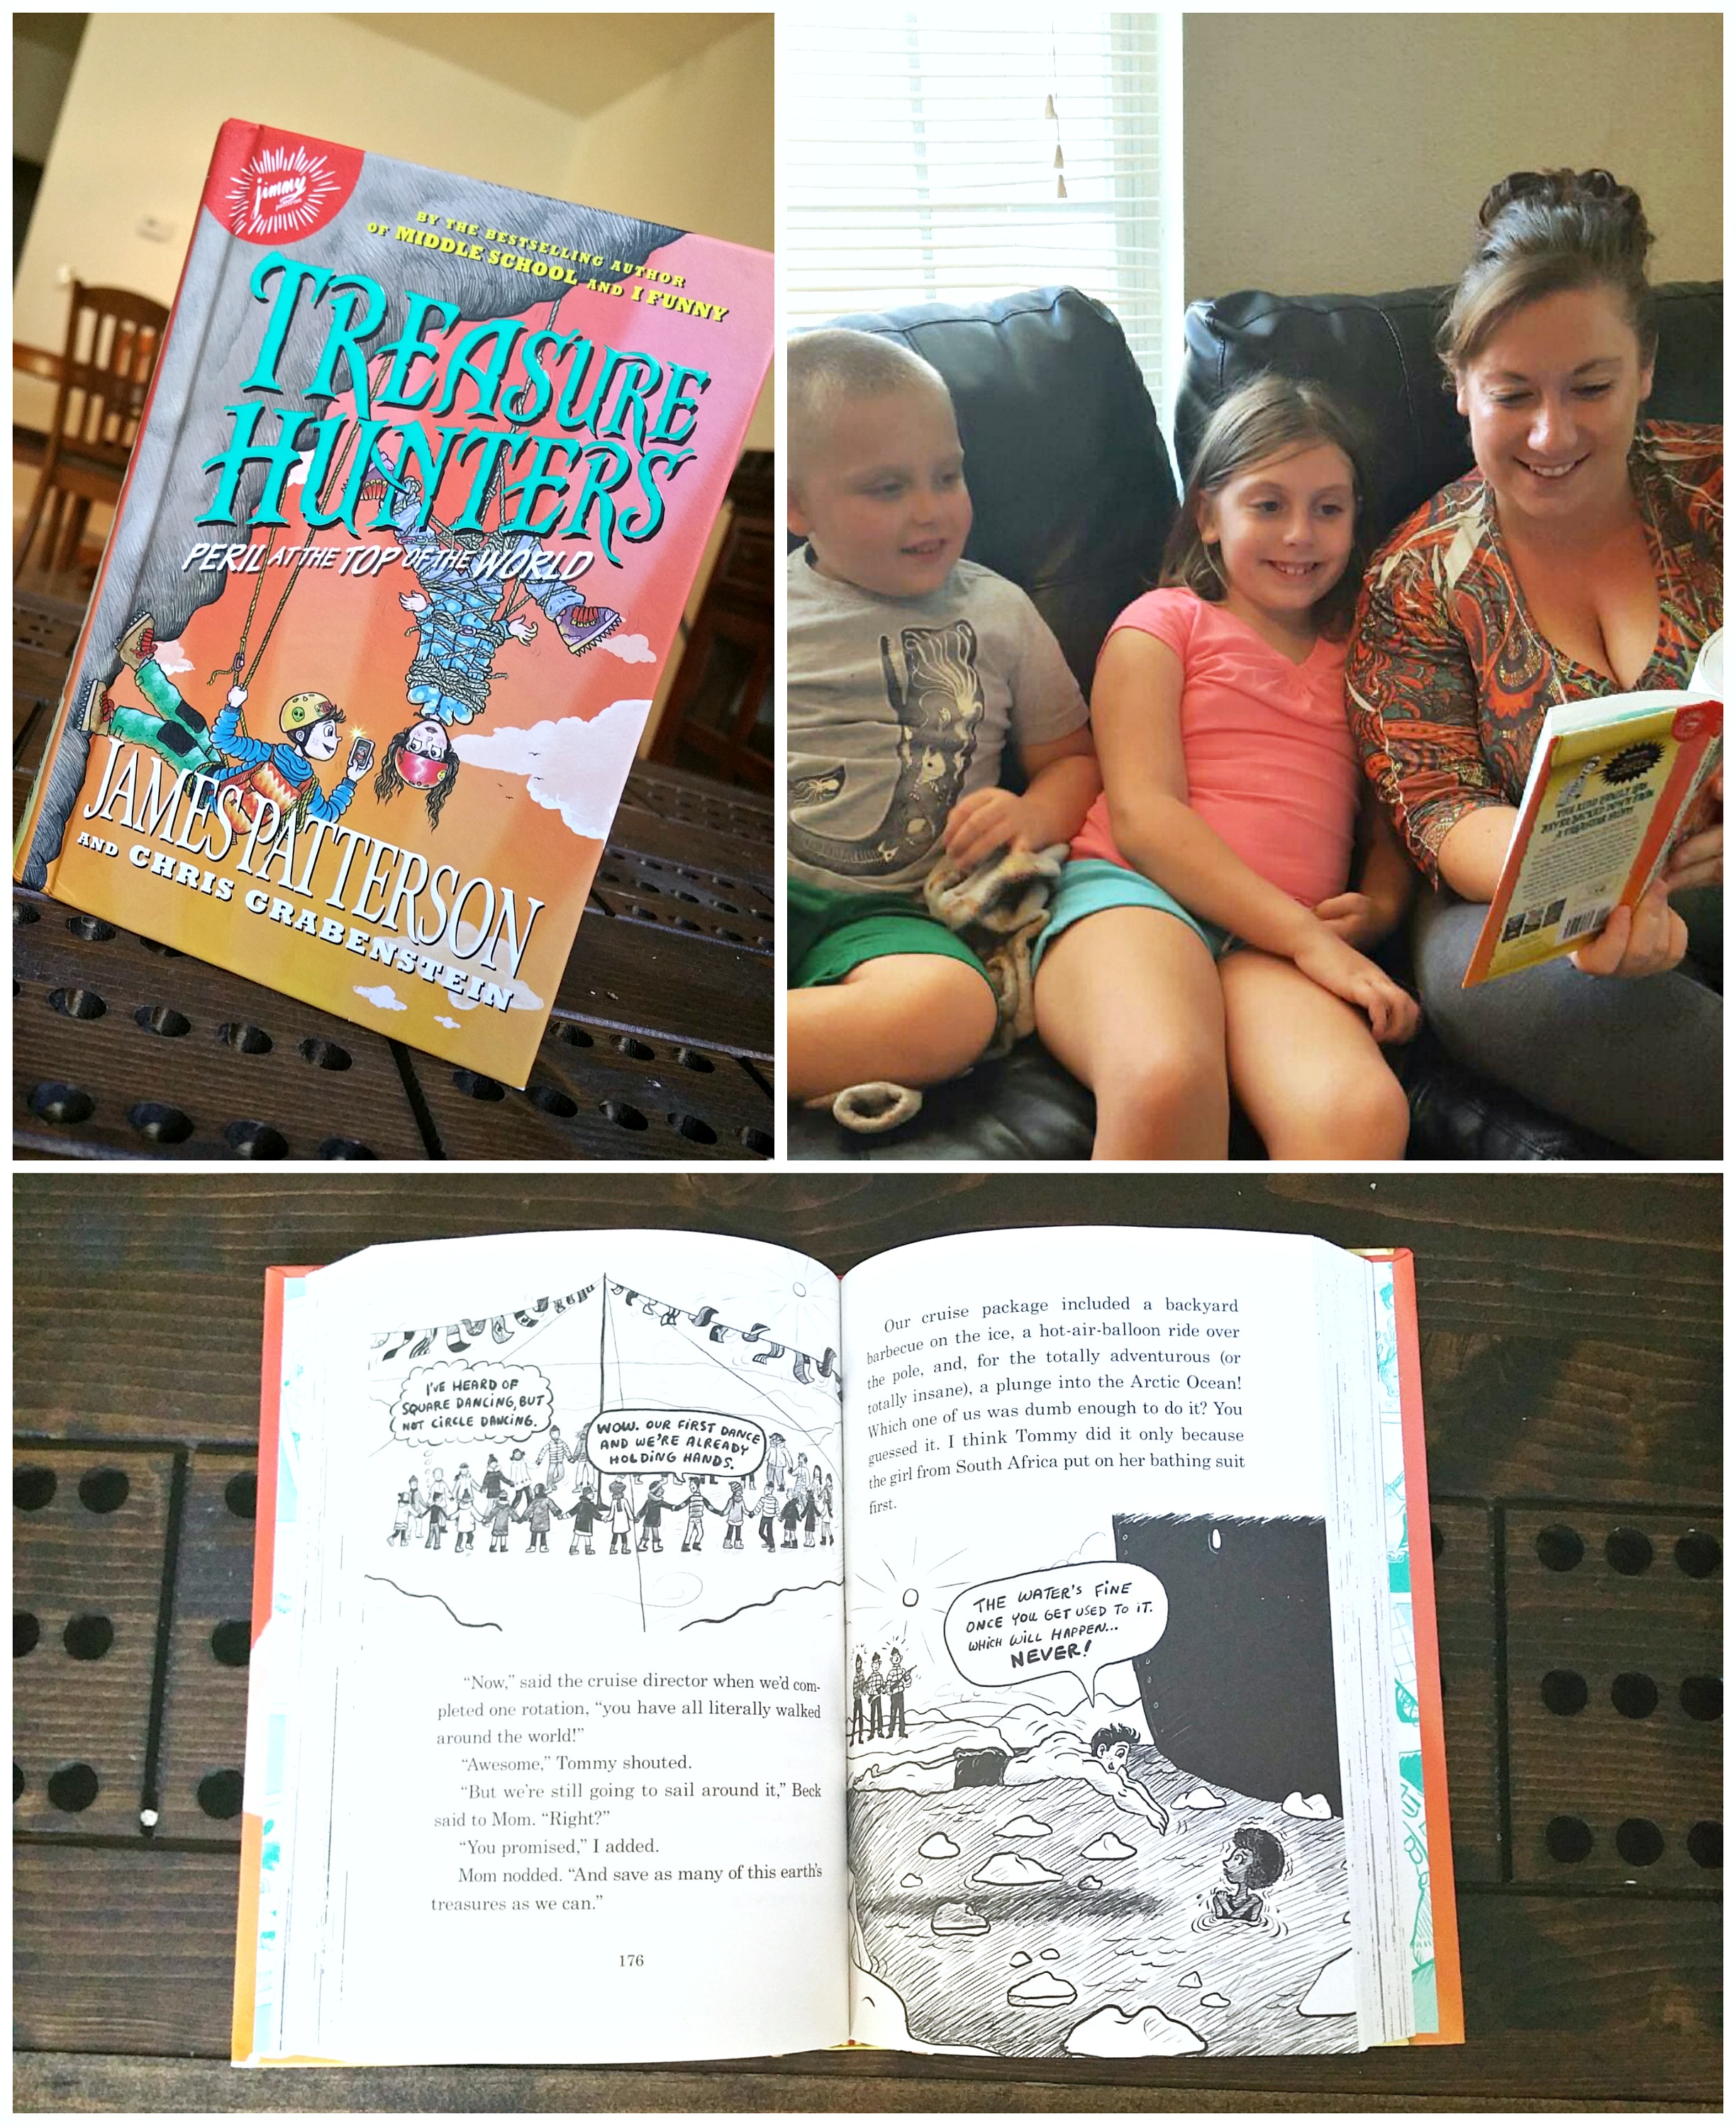 #TreasureHunters by James Patterson is a great new adventure book for kids! #ad